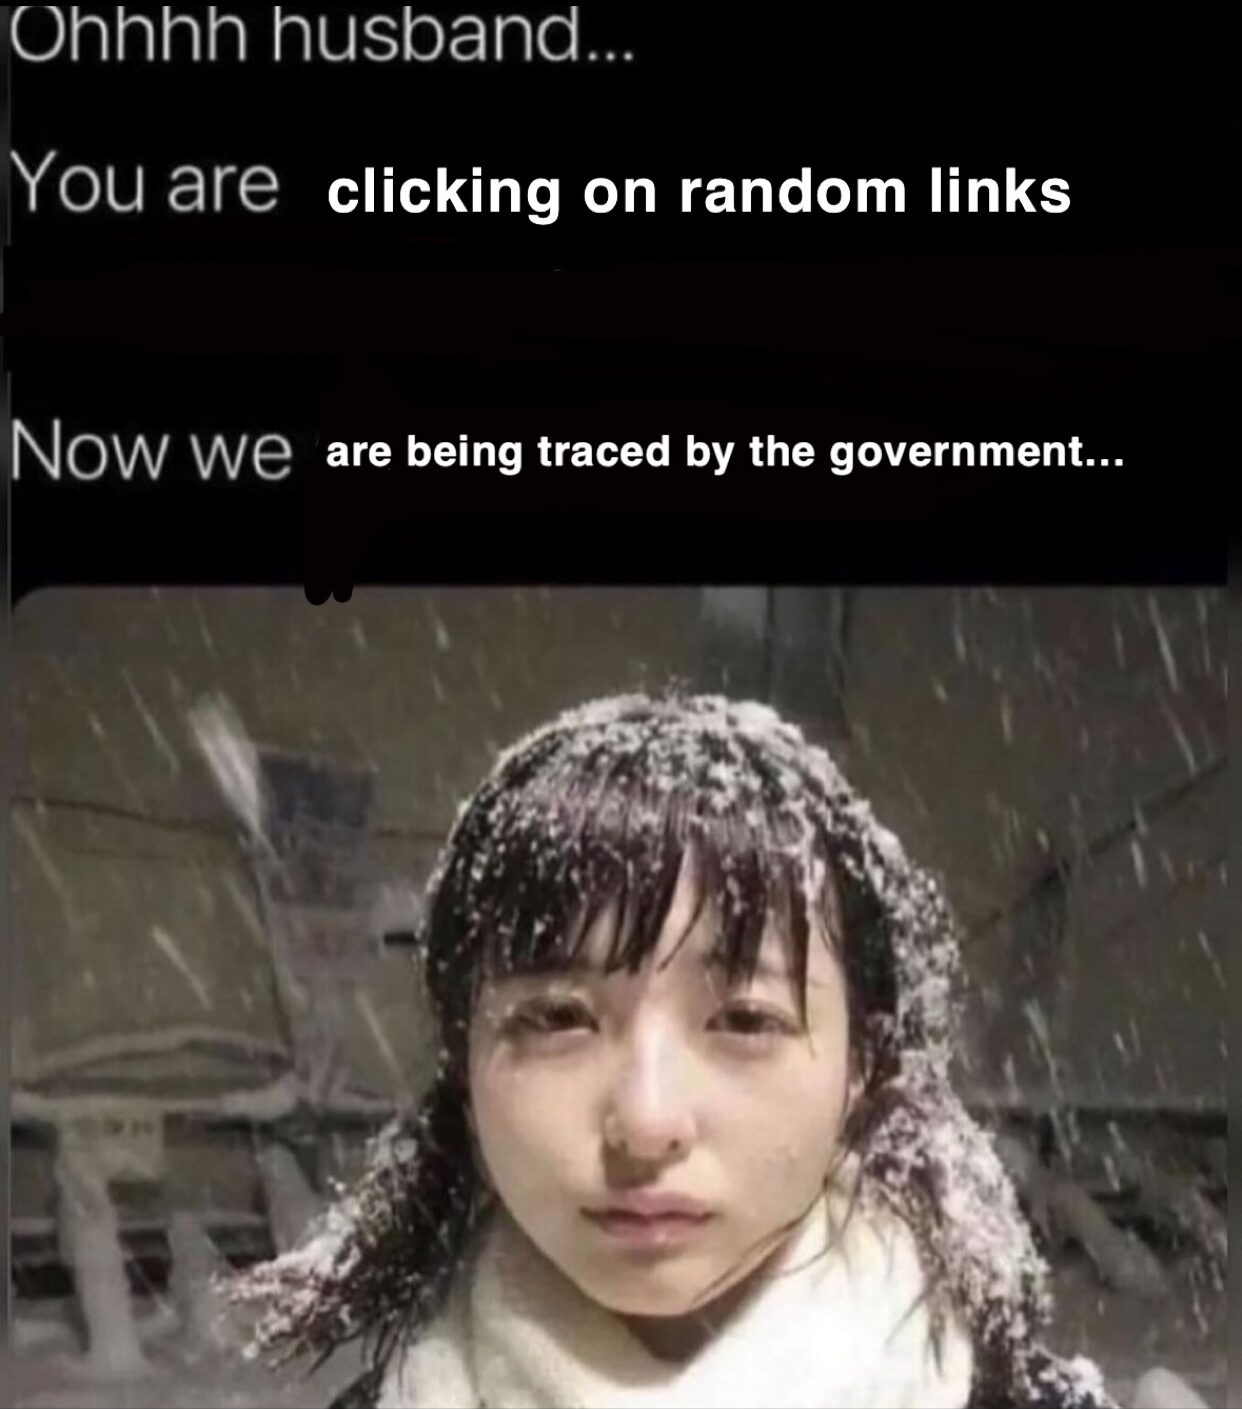 A cold woman in the snow looks sadly at the reader, expressing that clicking on digital links is what is causing them to be tracked by the government, making them lose their agency